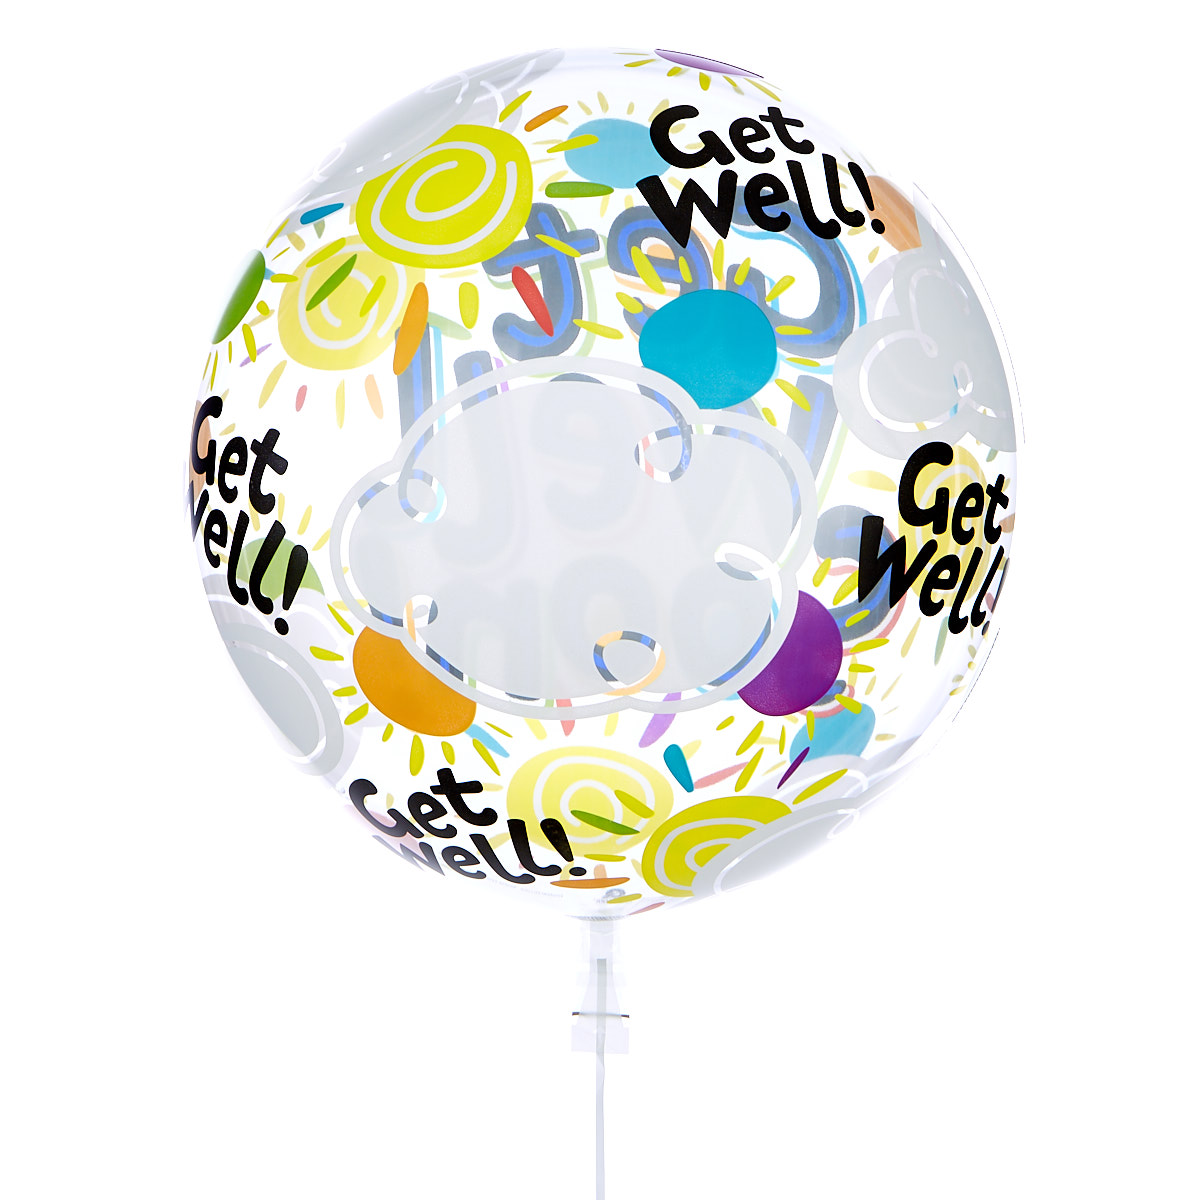 22-Inch Bubble Balloon - Get Well Soon - DELIVERED INFLATED! 